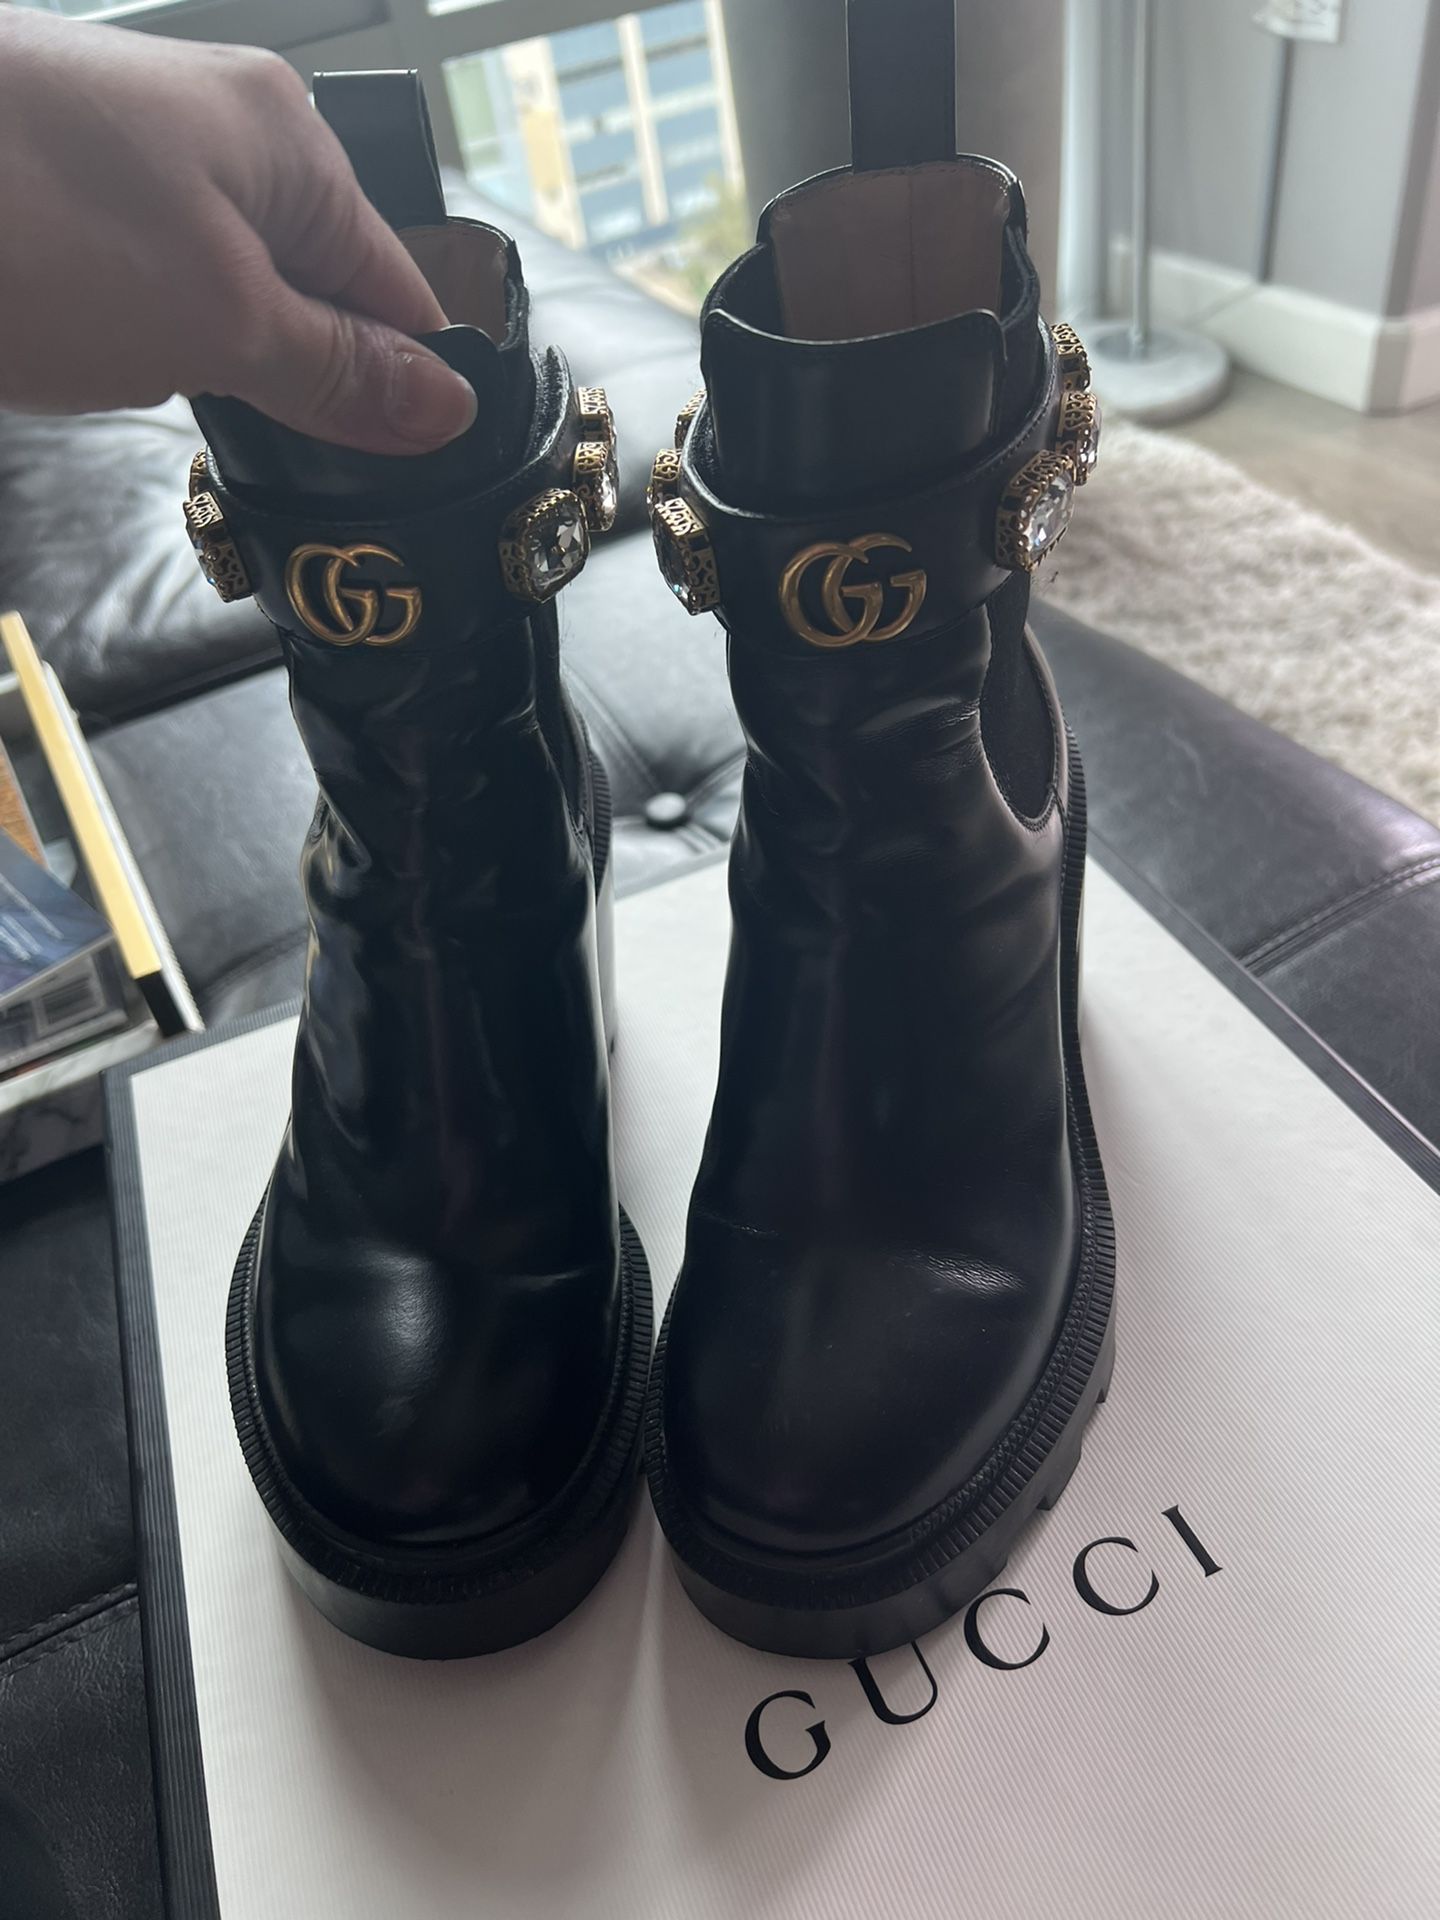 Authentic Gucci Boots 